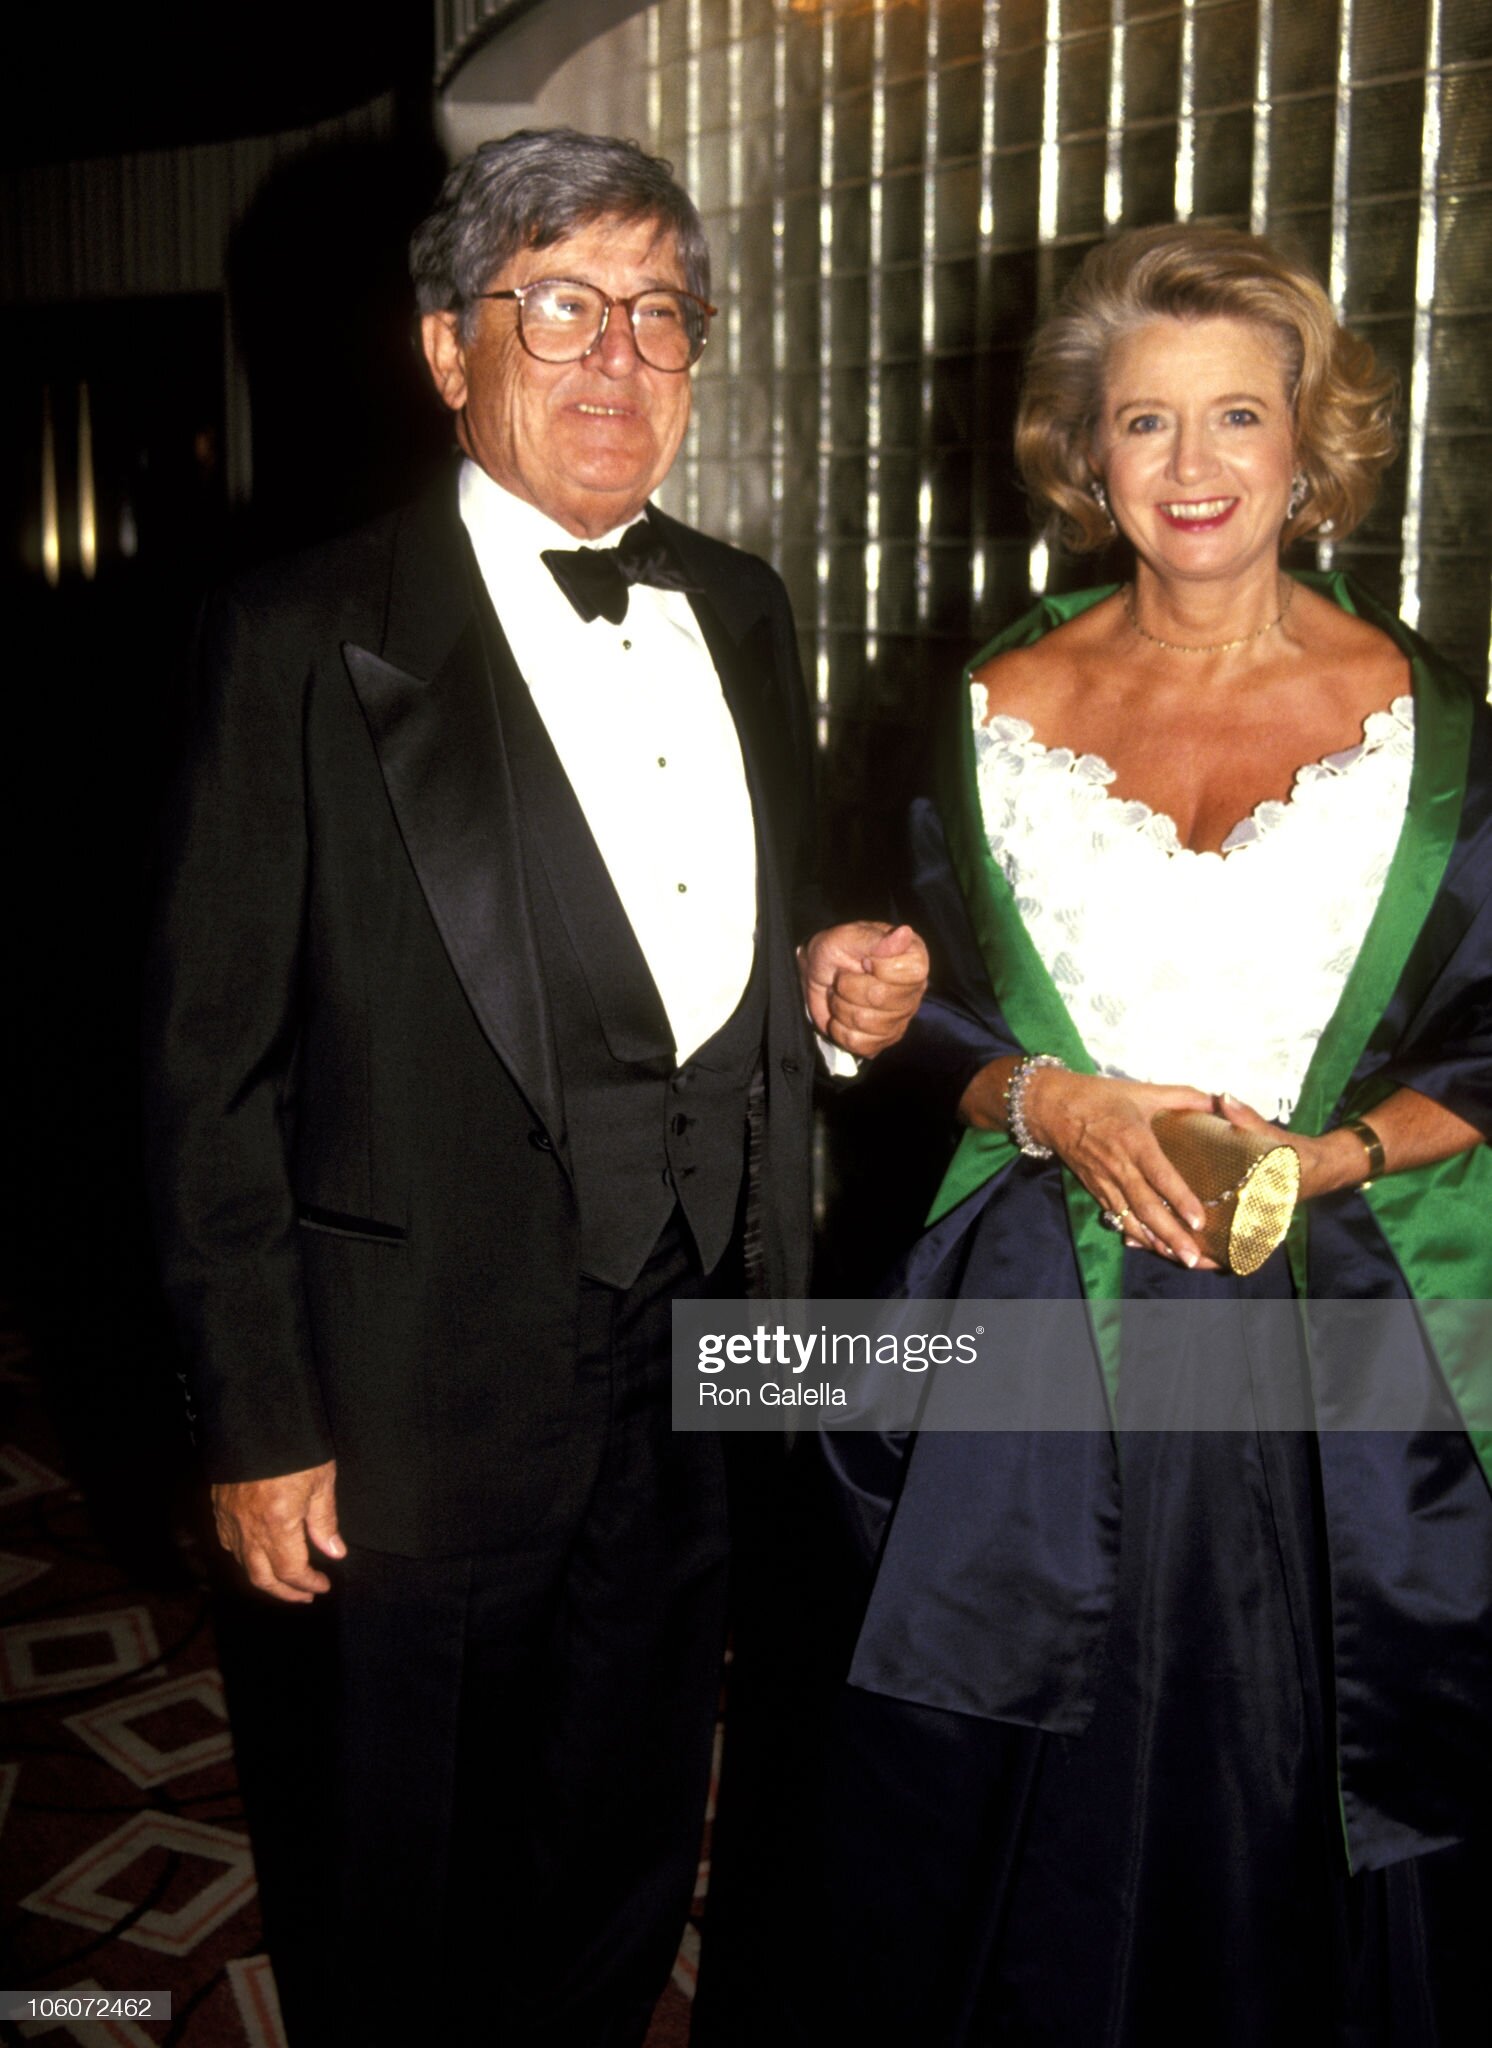 Abe Rosenthal and Shirley Lord during The Burden Center's 12th Annual Dinner Dance at Rainbow Room at Rockefeller Center, 1991.